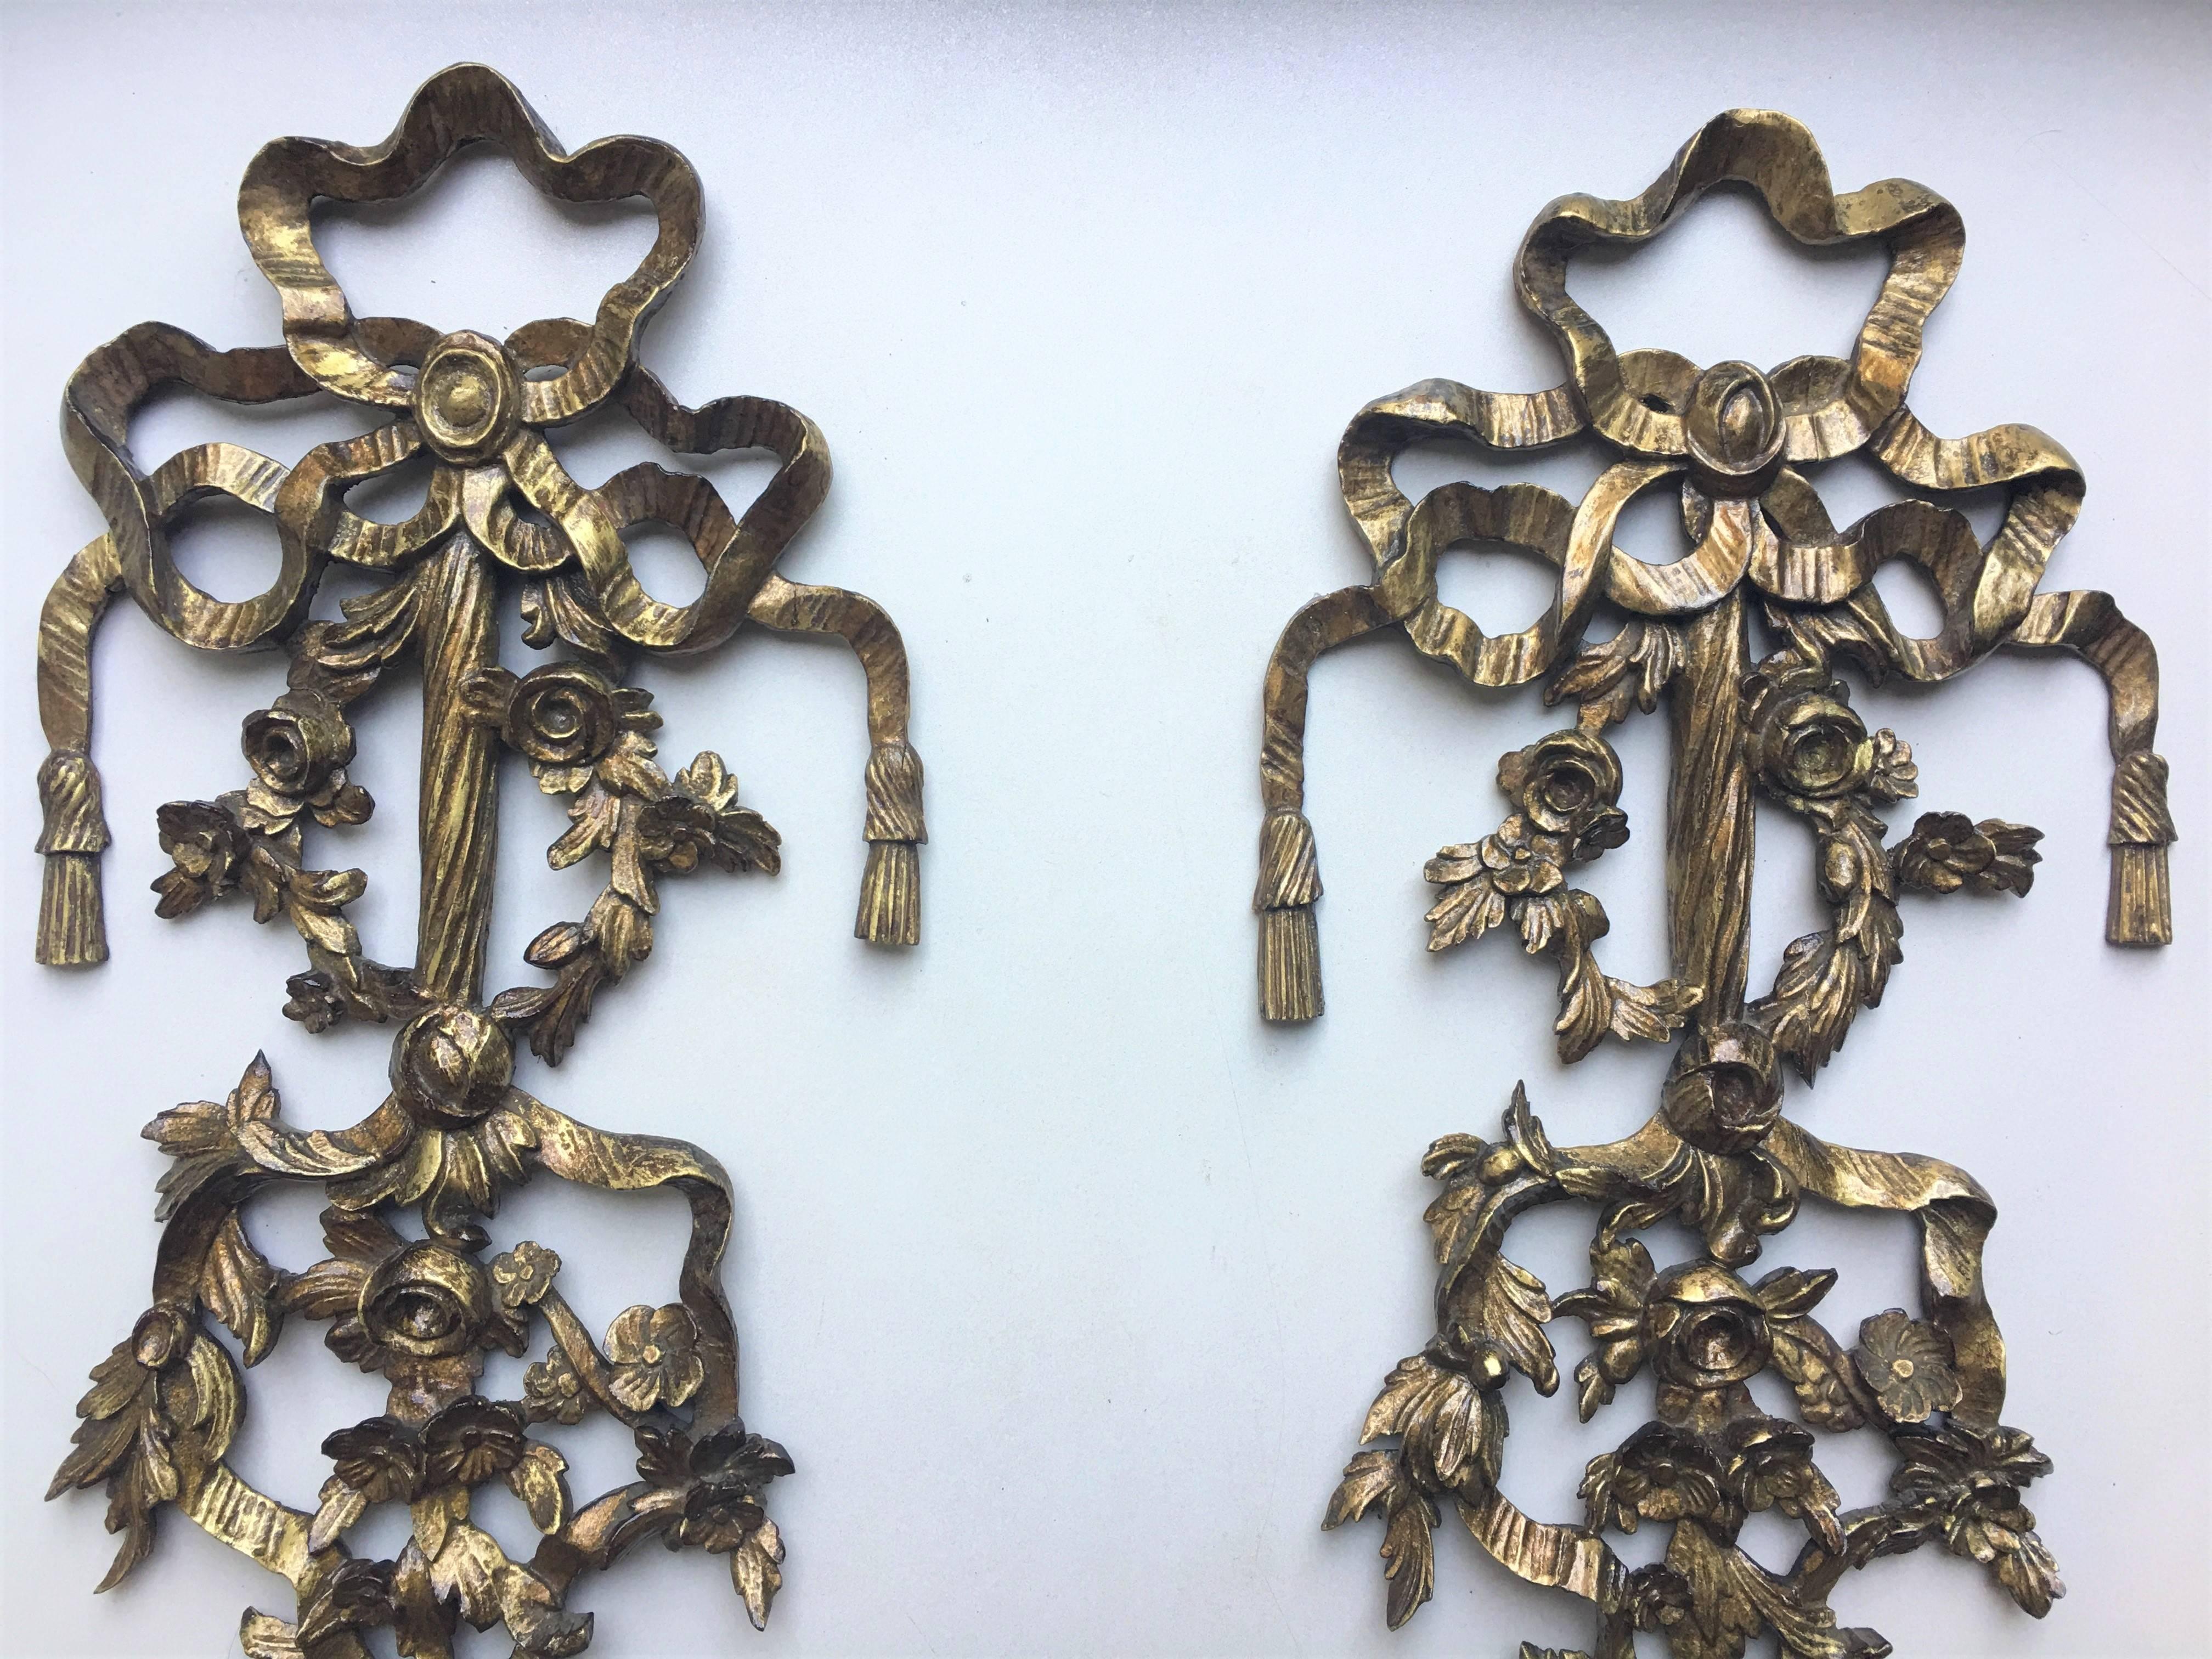 Wood Pair of 19th Century Regency Carved Giltwood Sconces or Wall Appliques For Sale